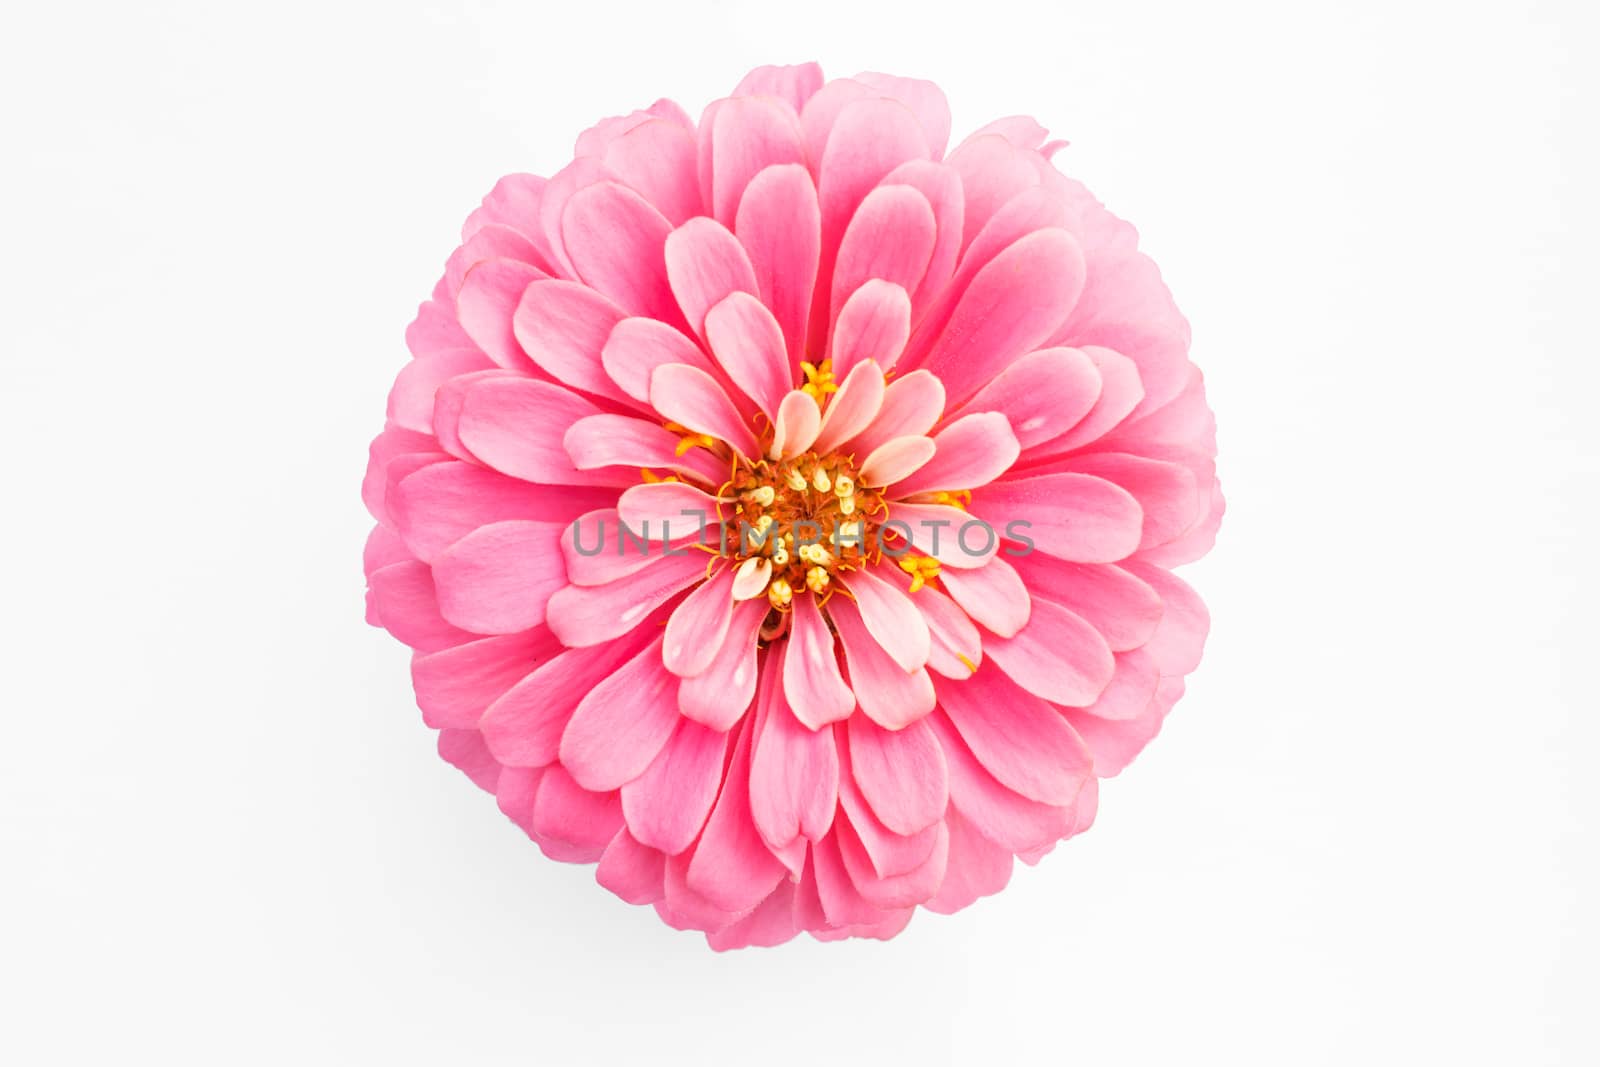 pink zinnia flower on white background by vitawin